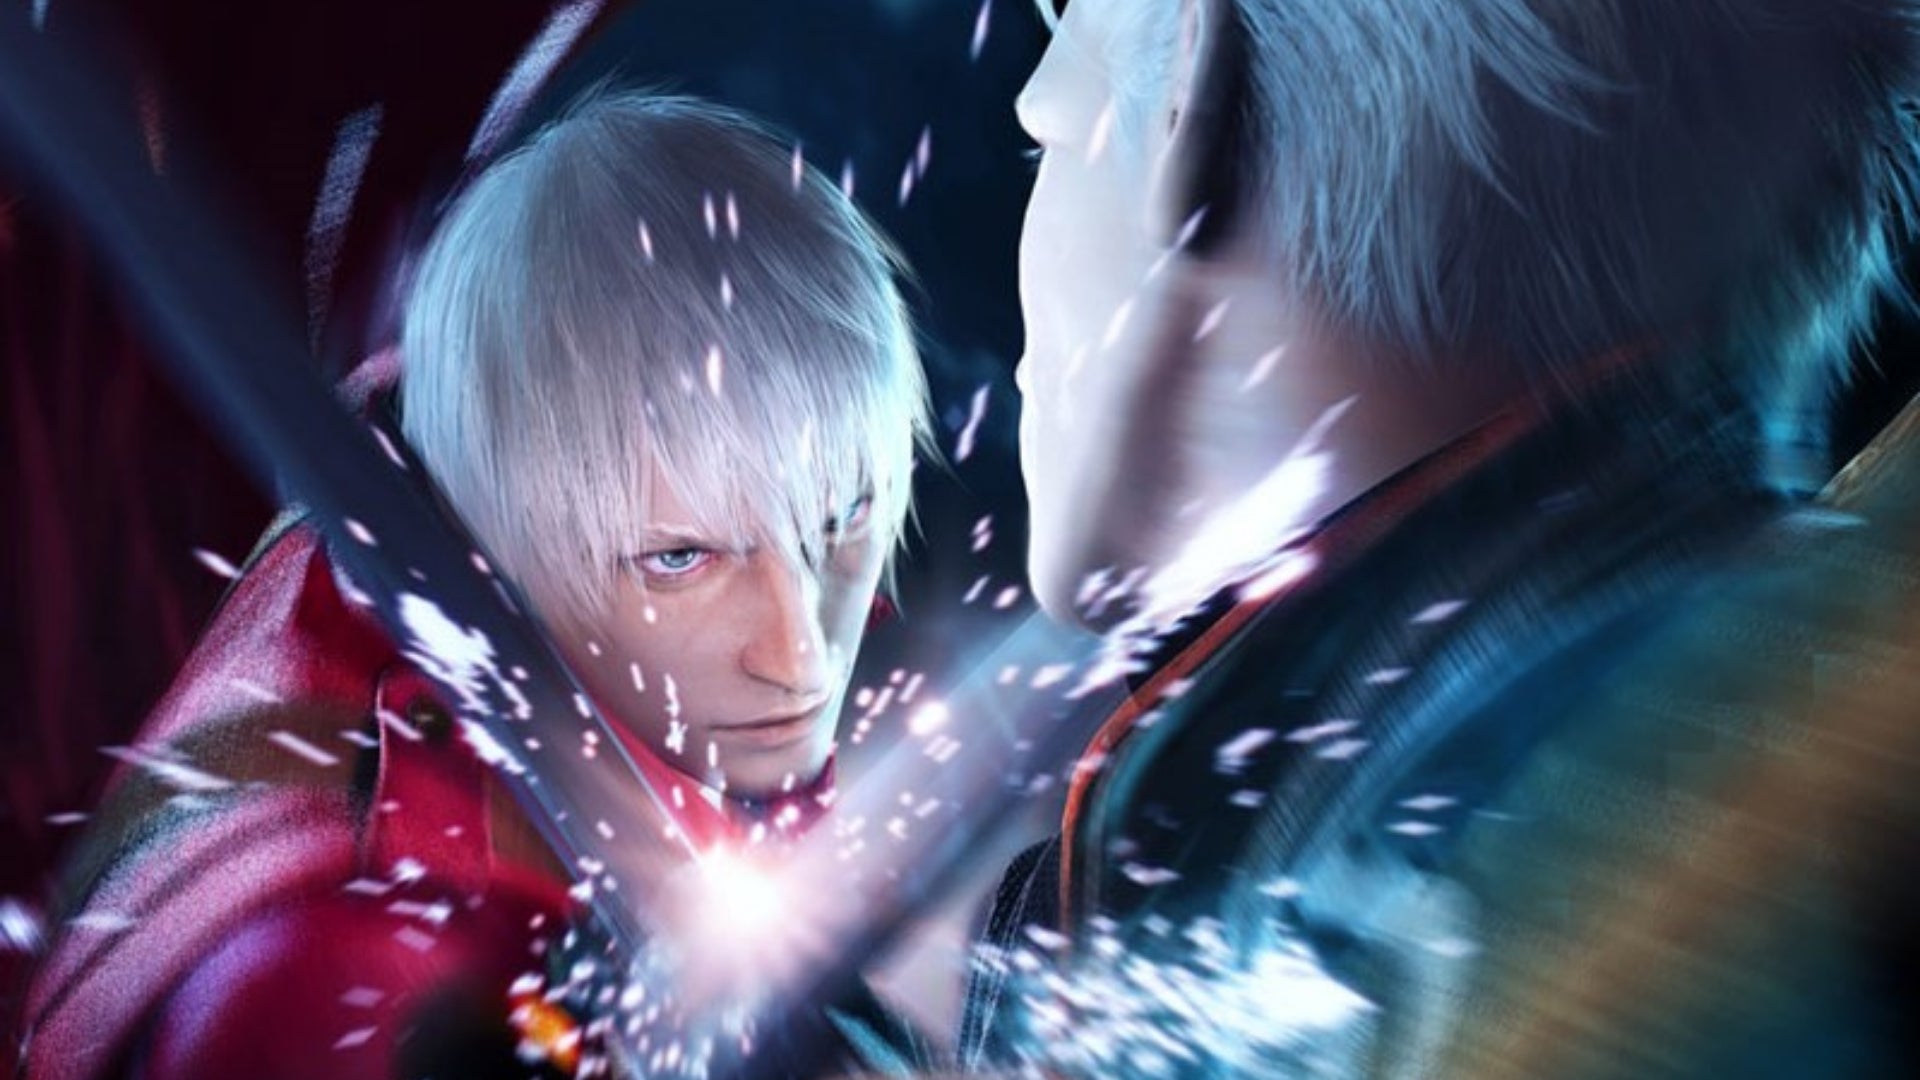 Devil May Cry 3 artwork featuring Dante and Vergil